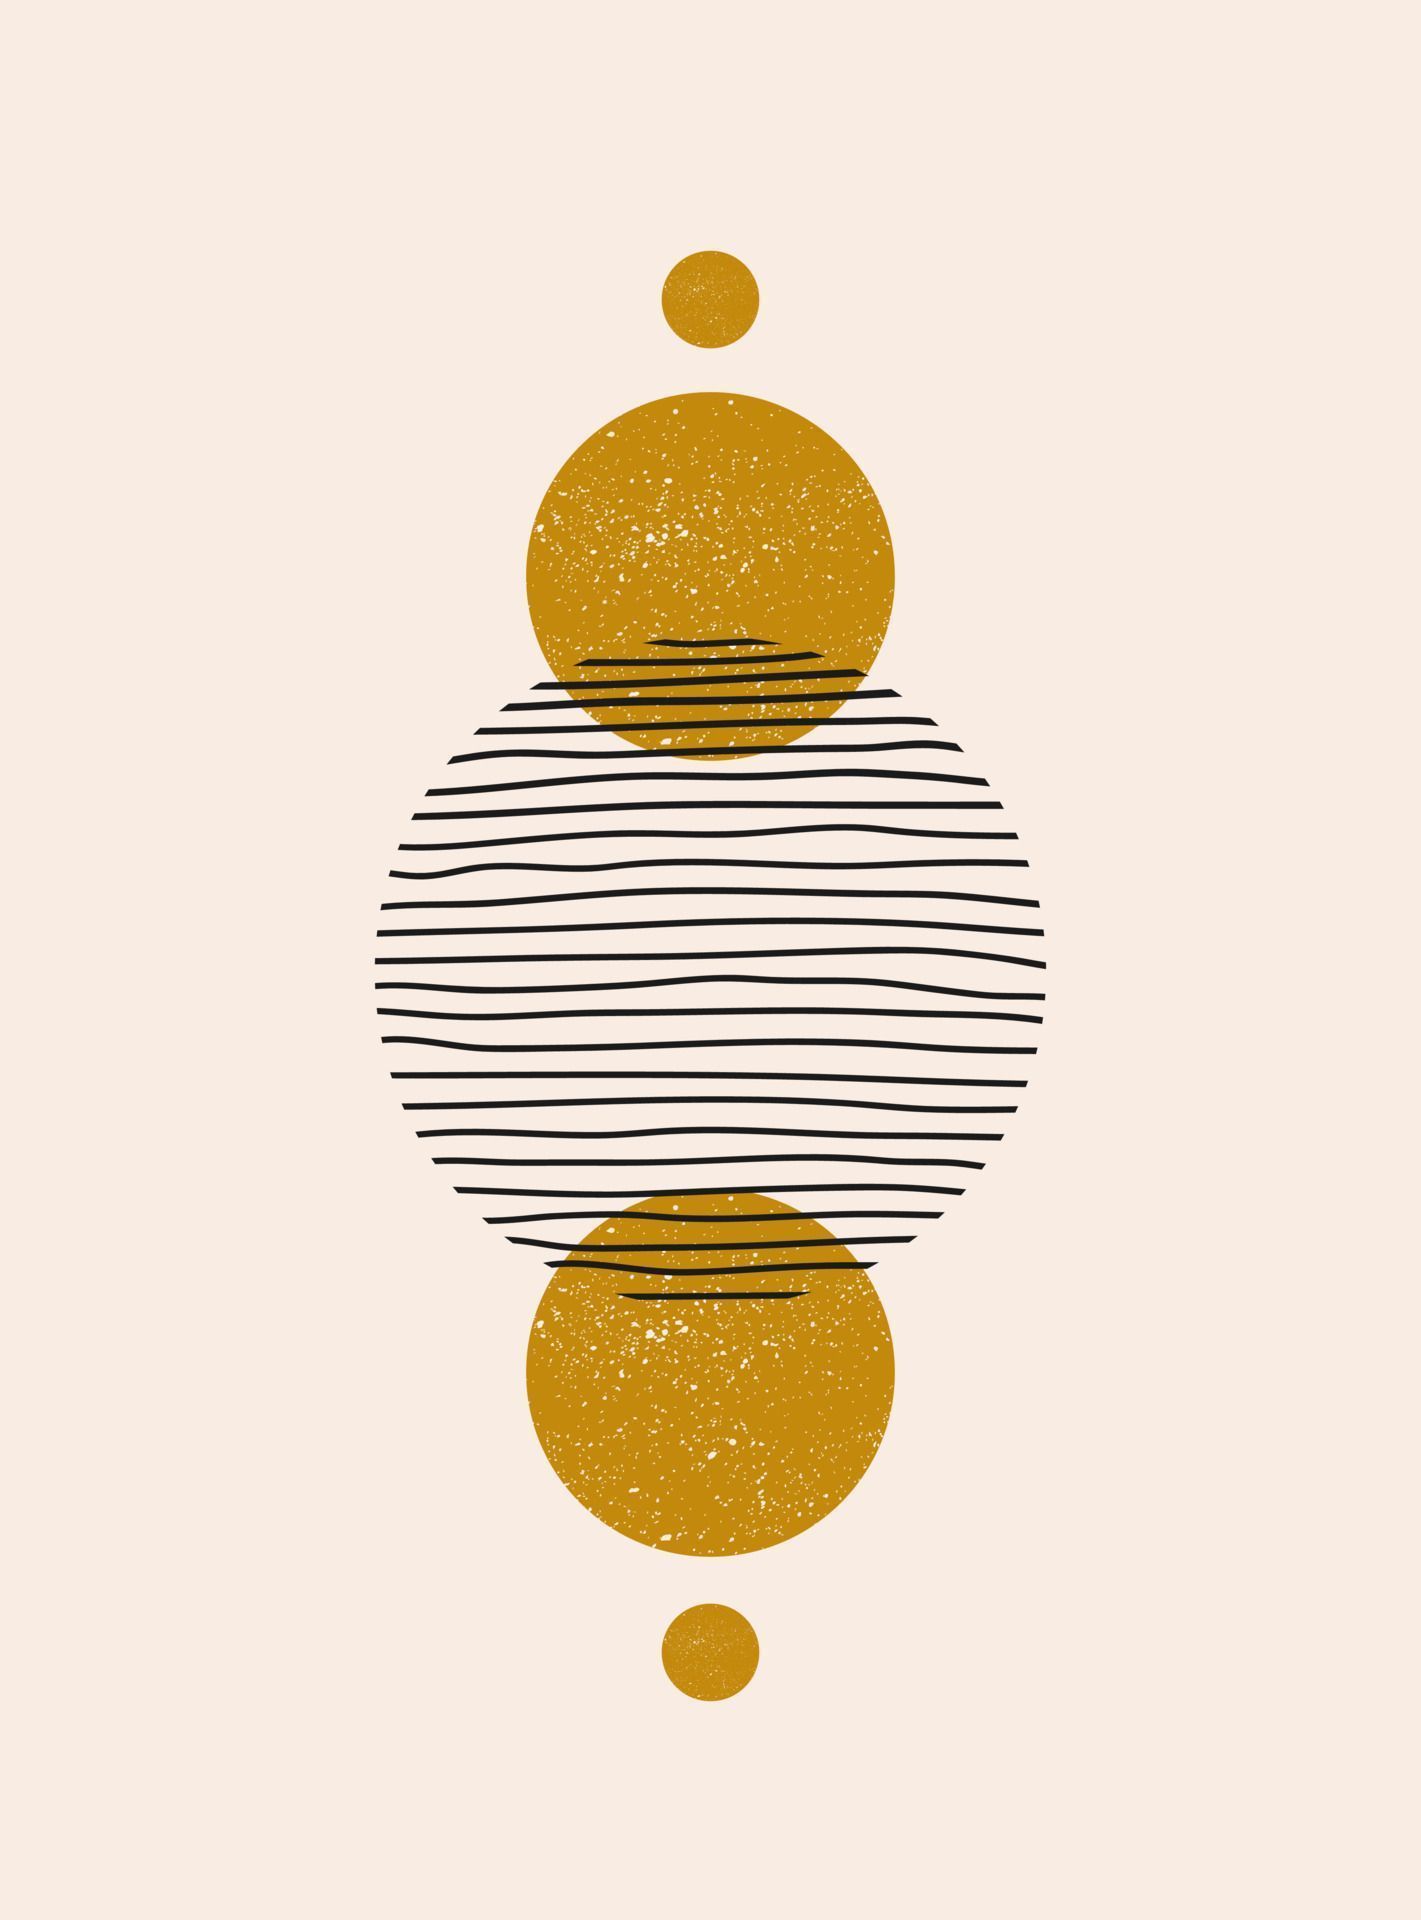 An abstract design with circles and lines - Balance, modern, geometry